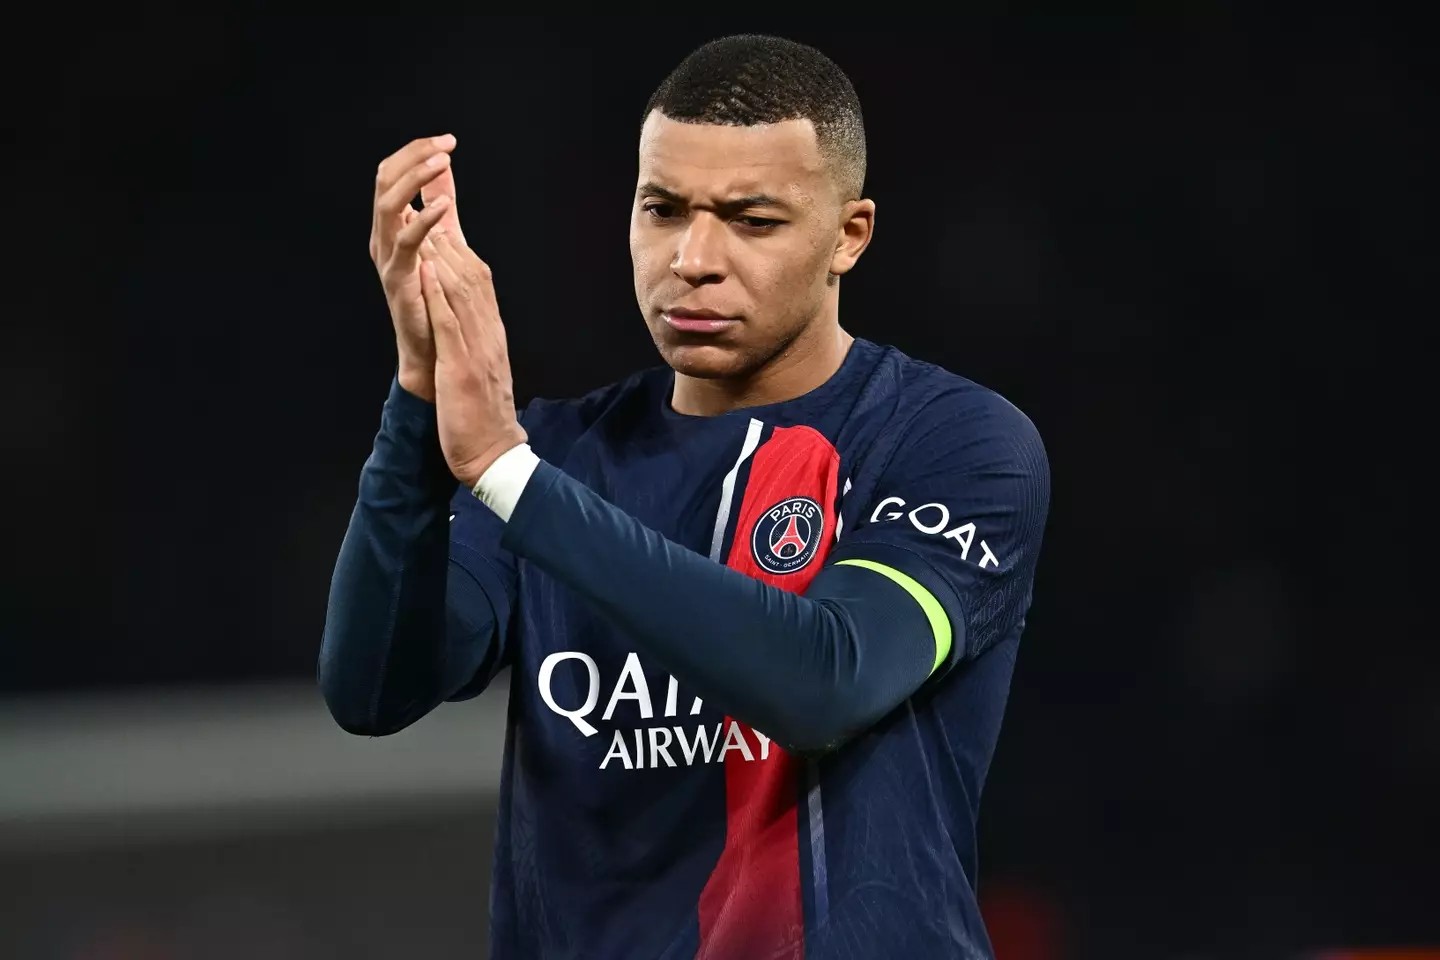 Mbappe has criticised Newcastle's style of play. (Image